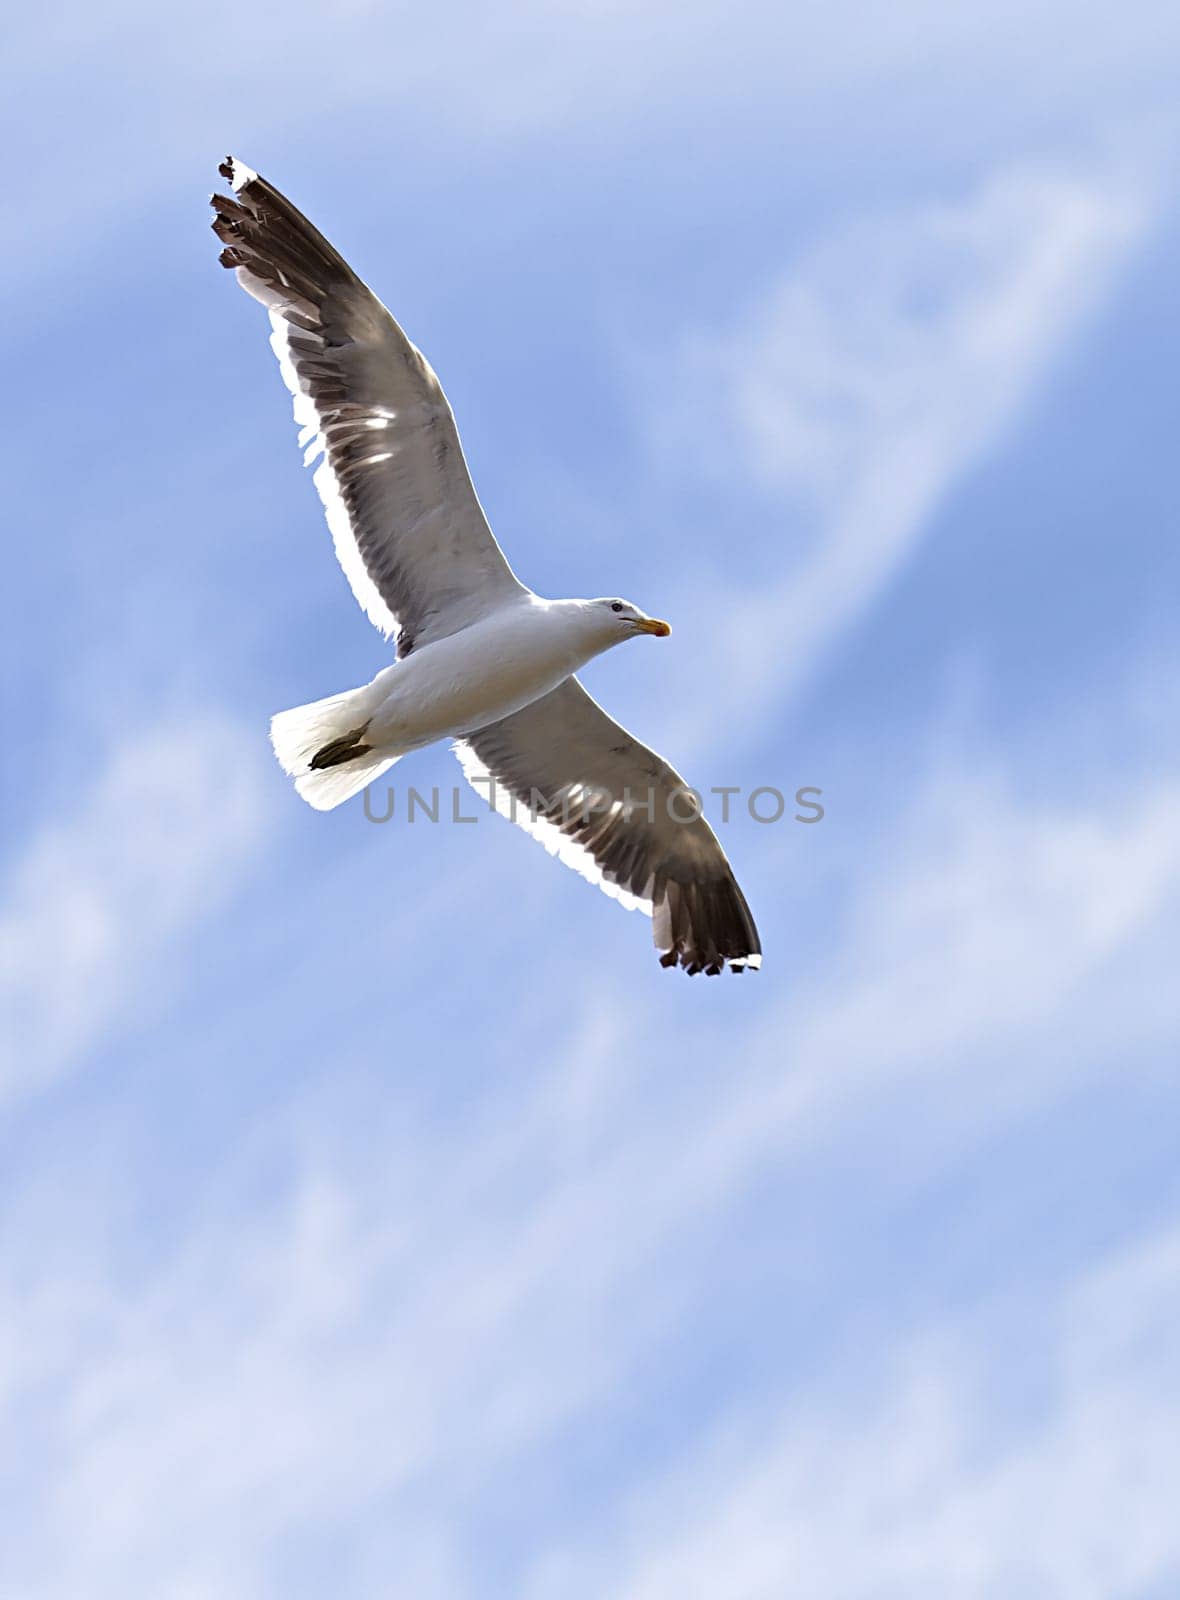 Flight, freedom and bird in sky with clouds, animals in migration and travel in air. Nature, wings and seagull flying with calm, tropical summer and wildlife with feathers, hunting and journey by YuriArcurs